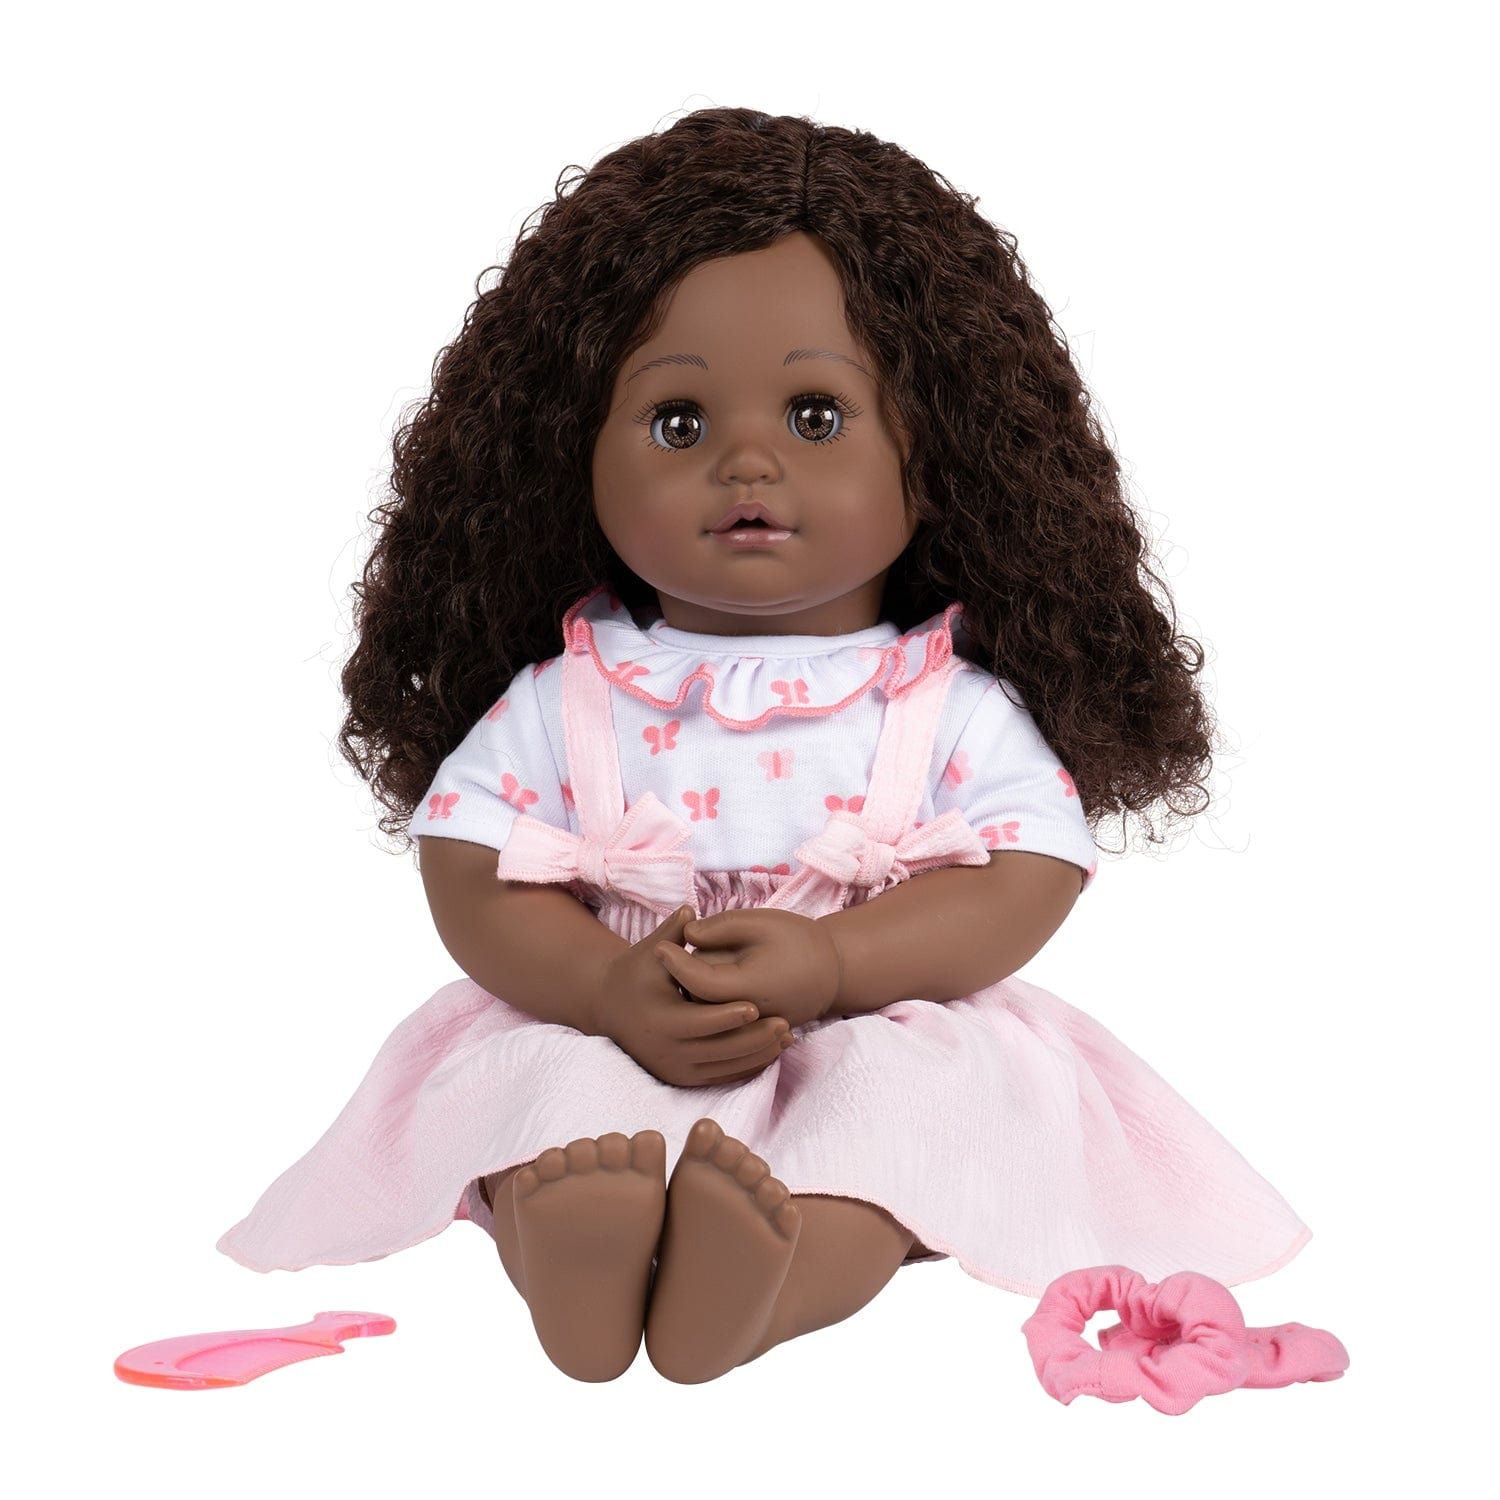 Ecore Fun Black Doll 145 Inch Baby Girl Doll and Clothes Set  AfricanAmerican Washable Realistic Silicone Girl Dolls Best Gift for Kids  Girls  Amazonin Toys  Games